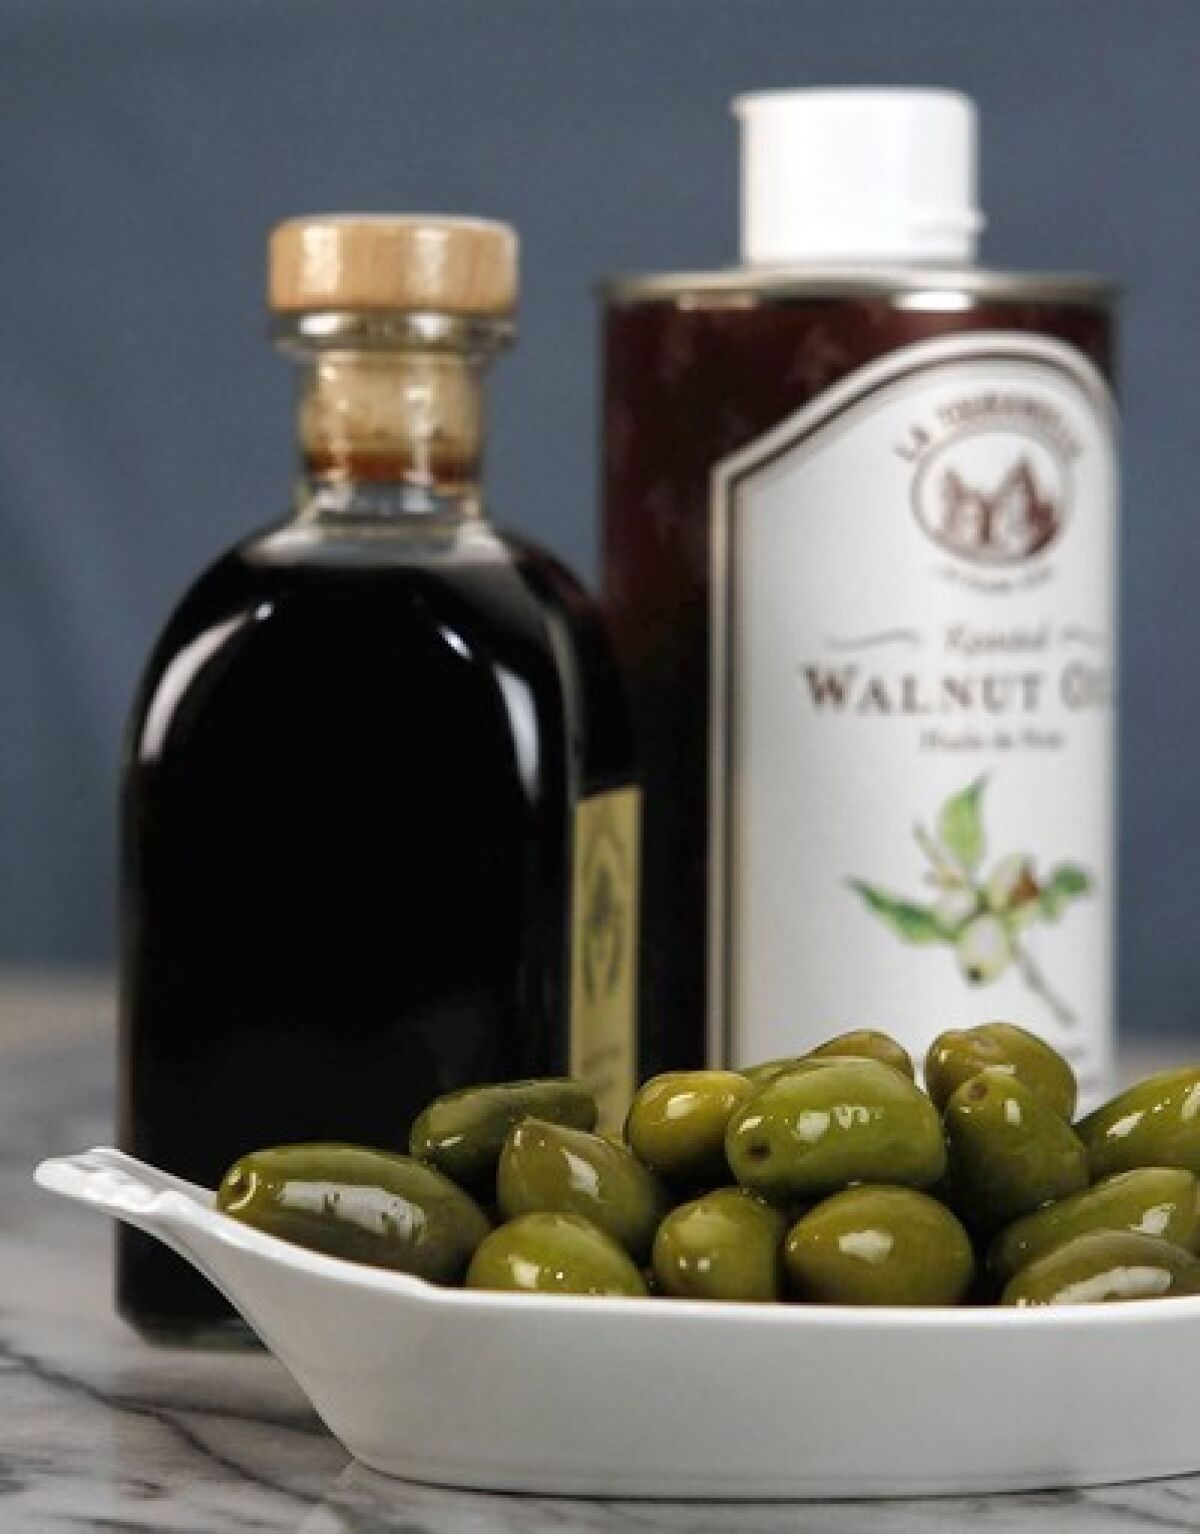 Nice olives and oils can make good hostess gifts.